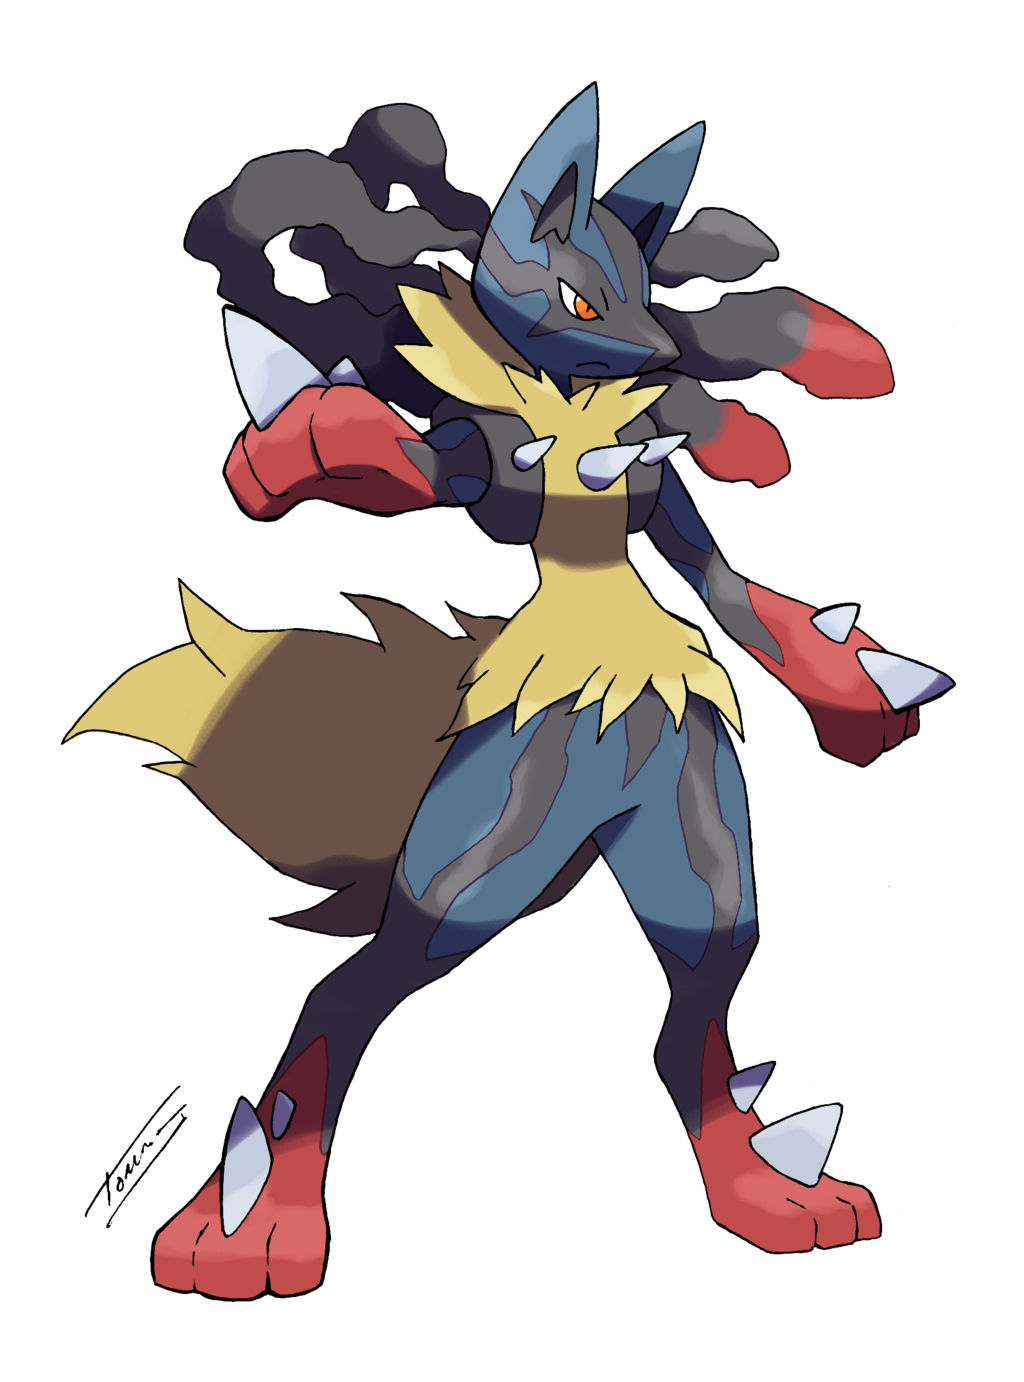 Lucario Mega Form by Tomycase on